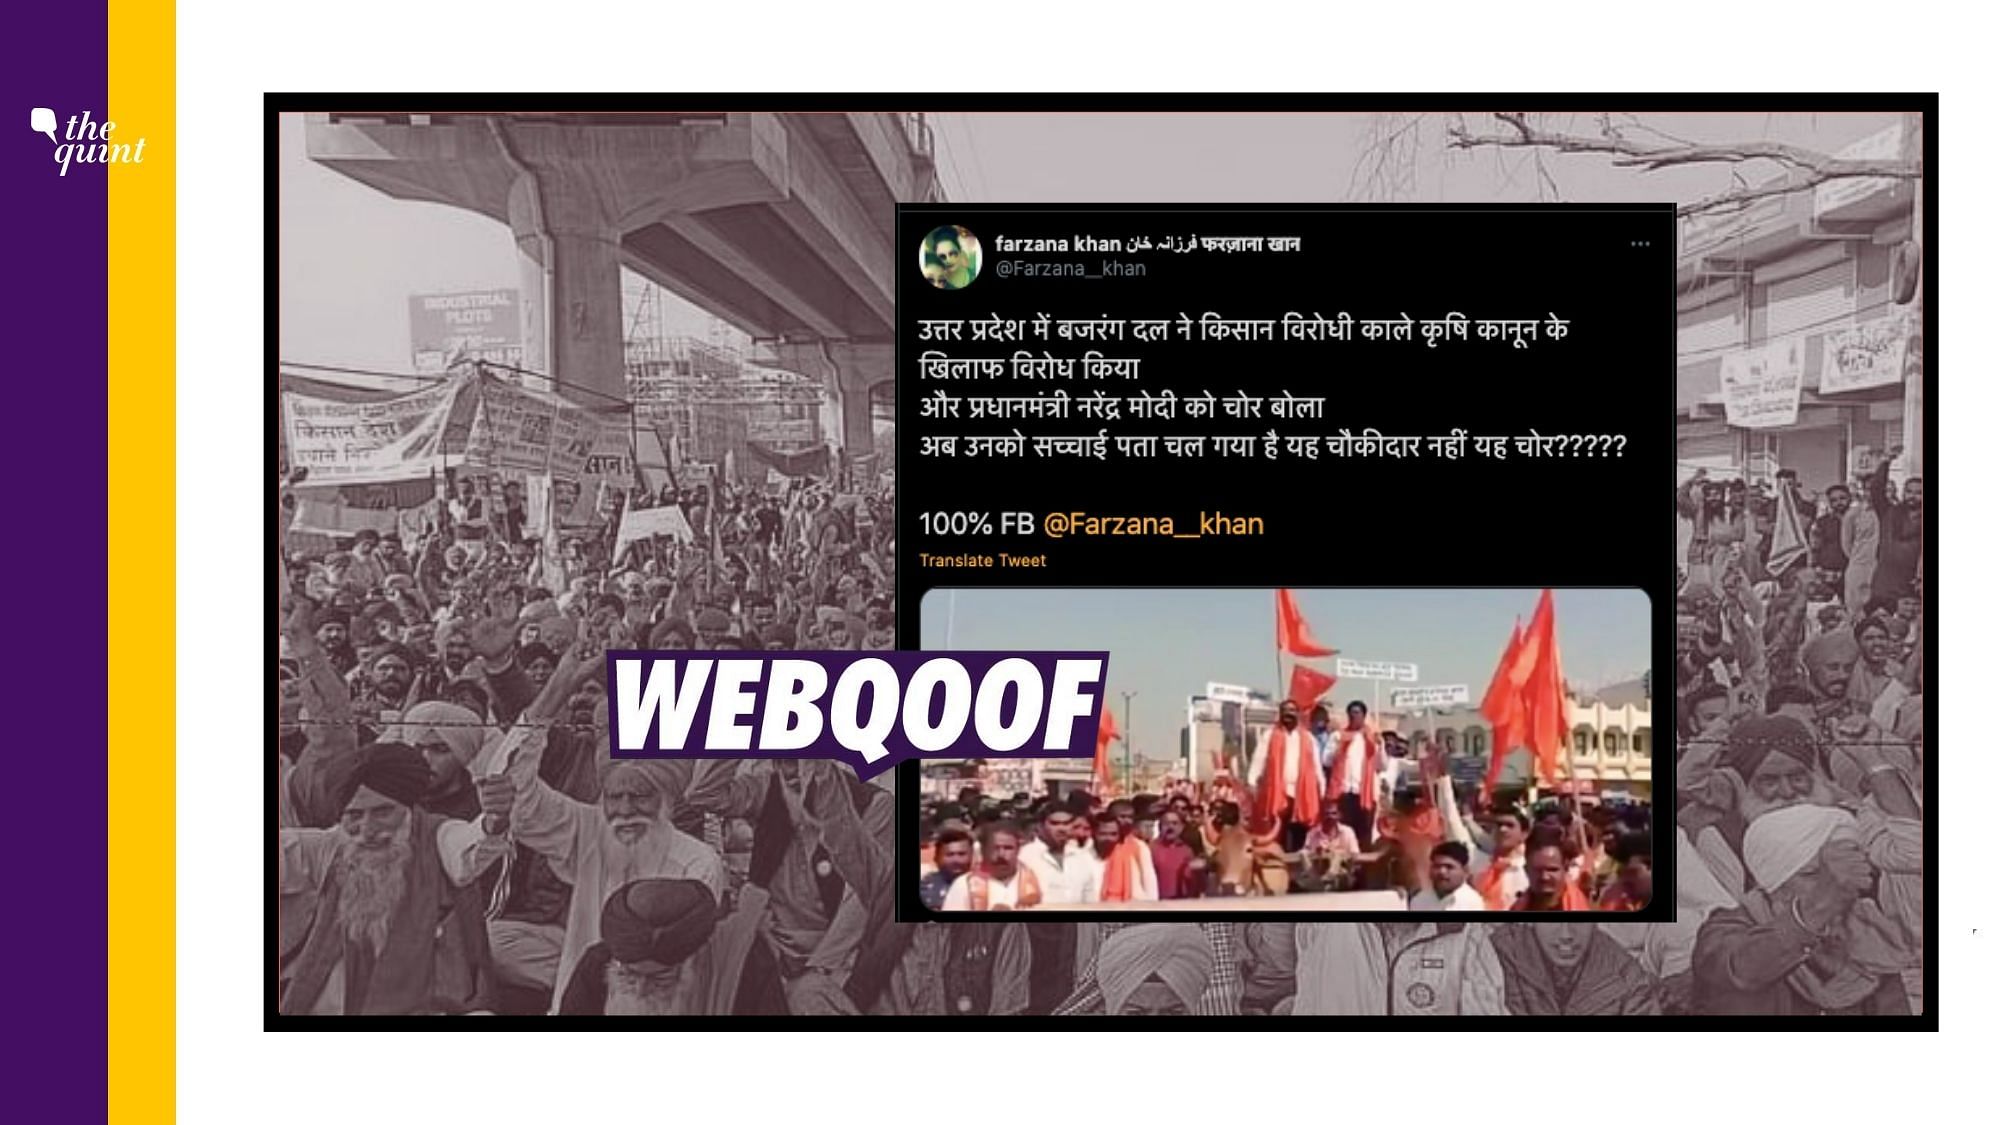 Video of a protest organised by Shiv Sena workers is doing the rounds on social media with a claim that it shows Bajrang Dal members raising slogans against PM Modi.